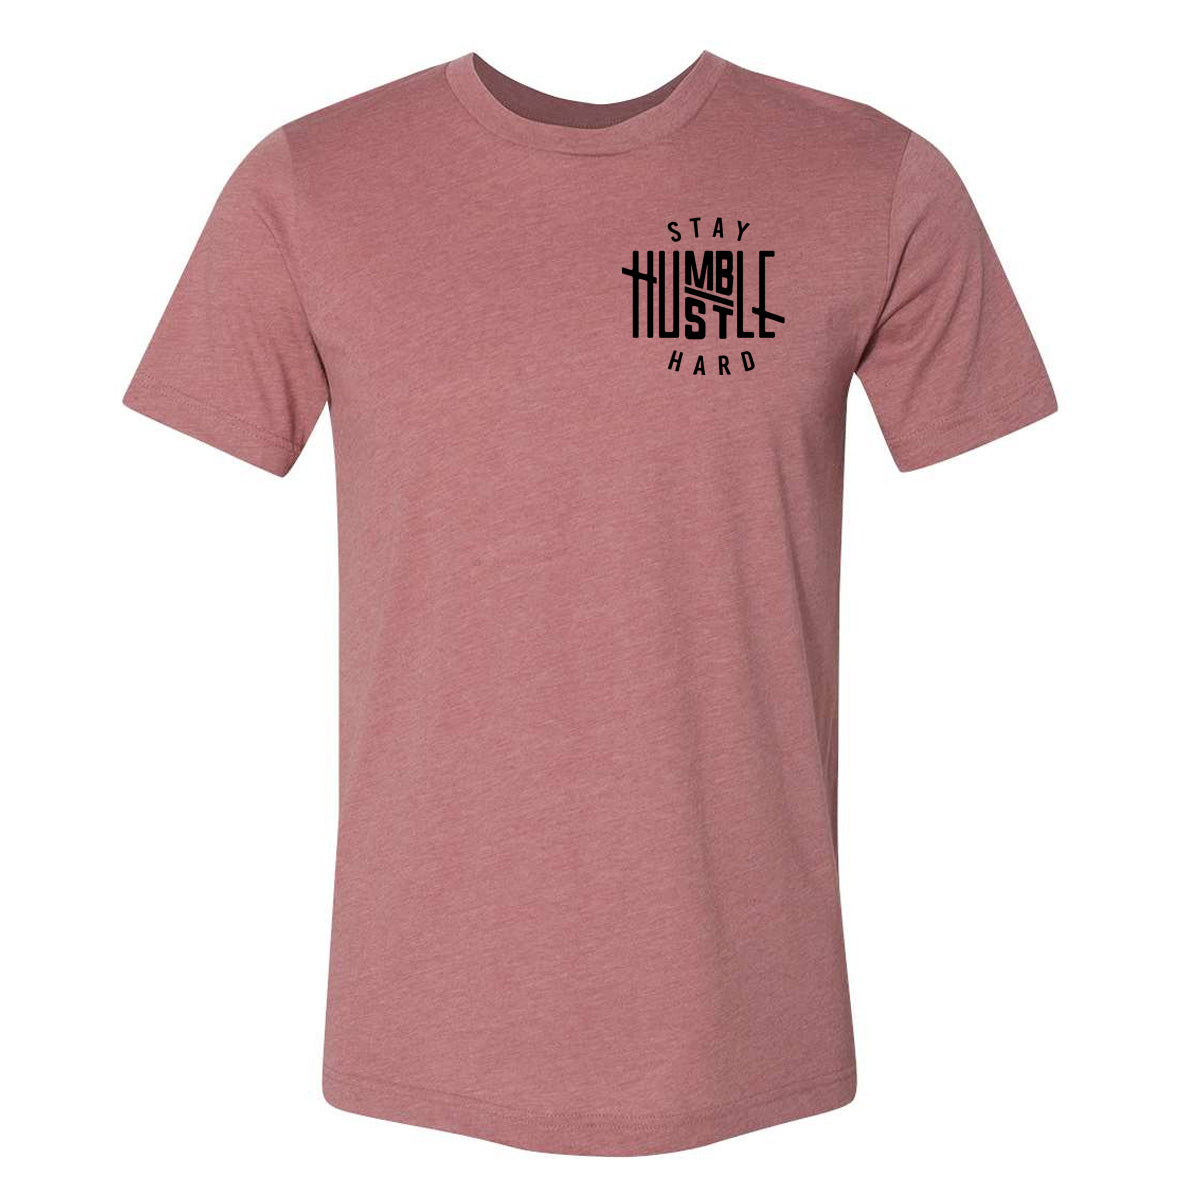 Stay Humble Hustle Hard - Heather Mauve Short Sleeves - Southern Grace Creations